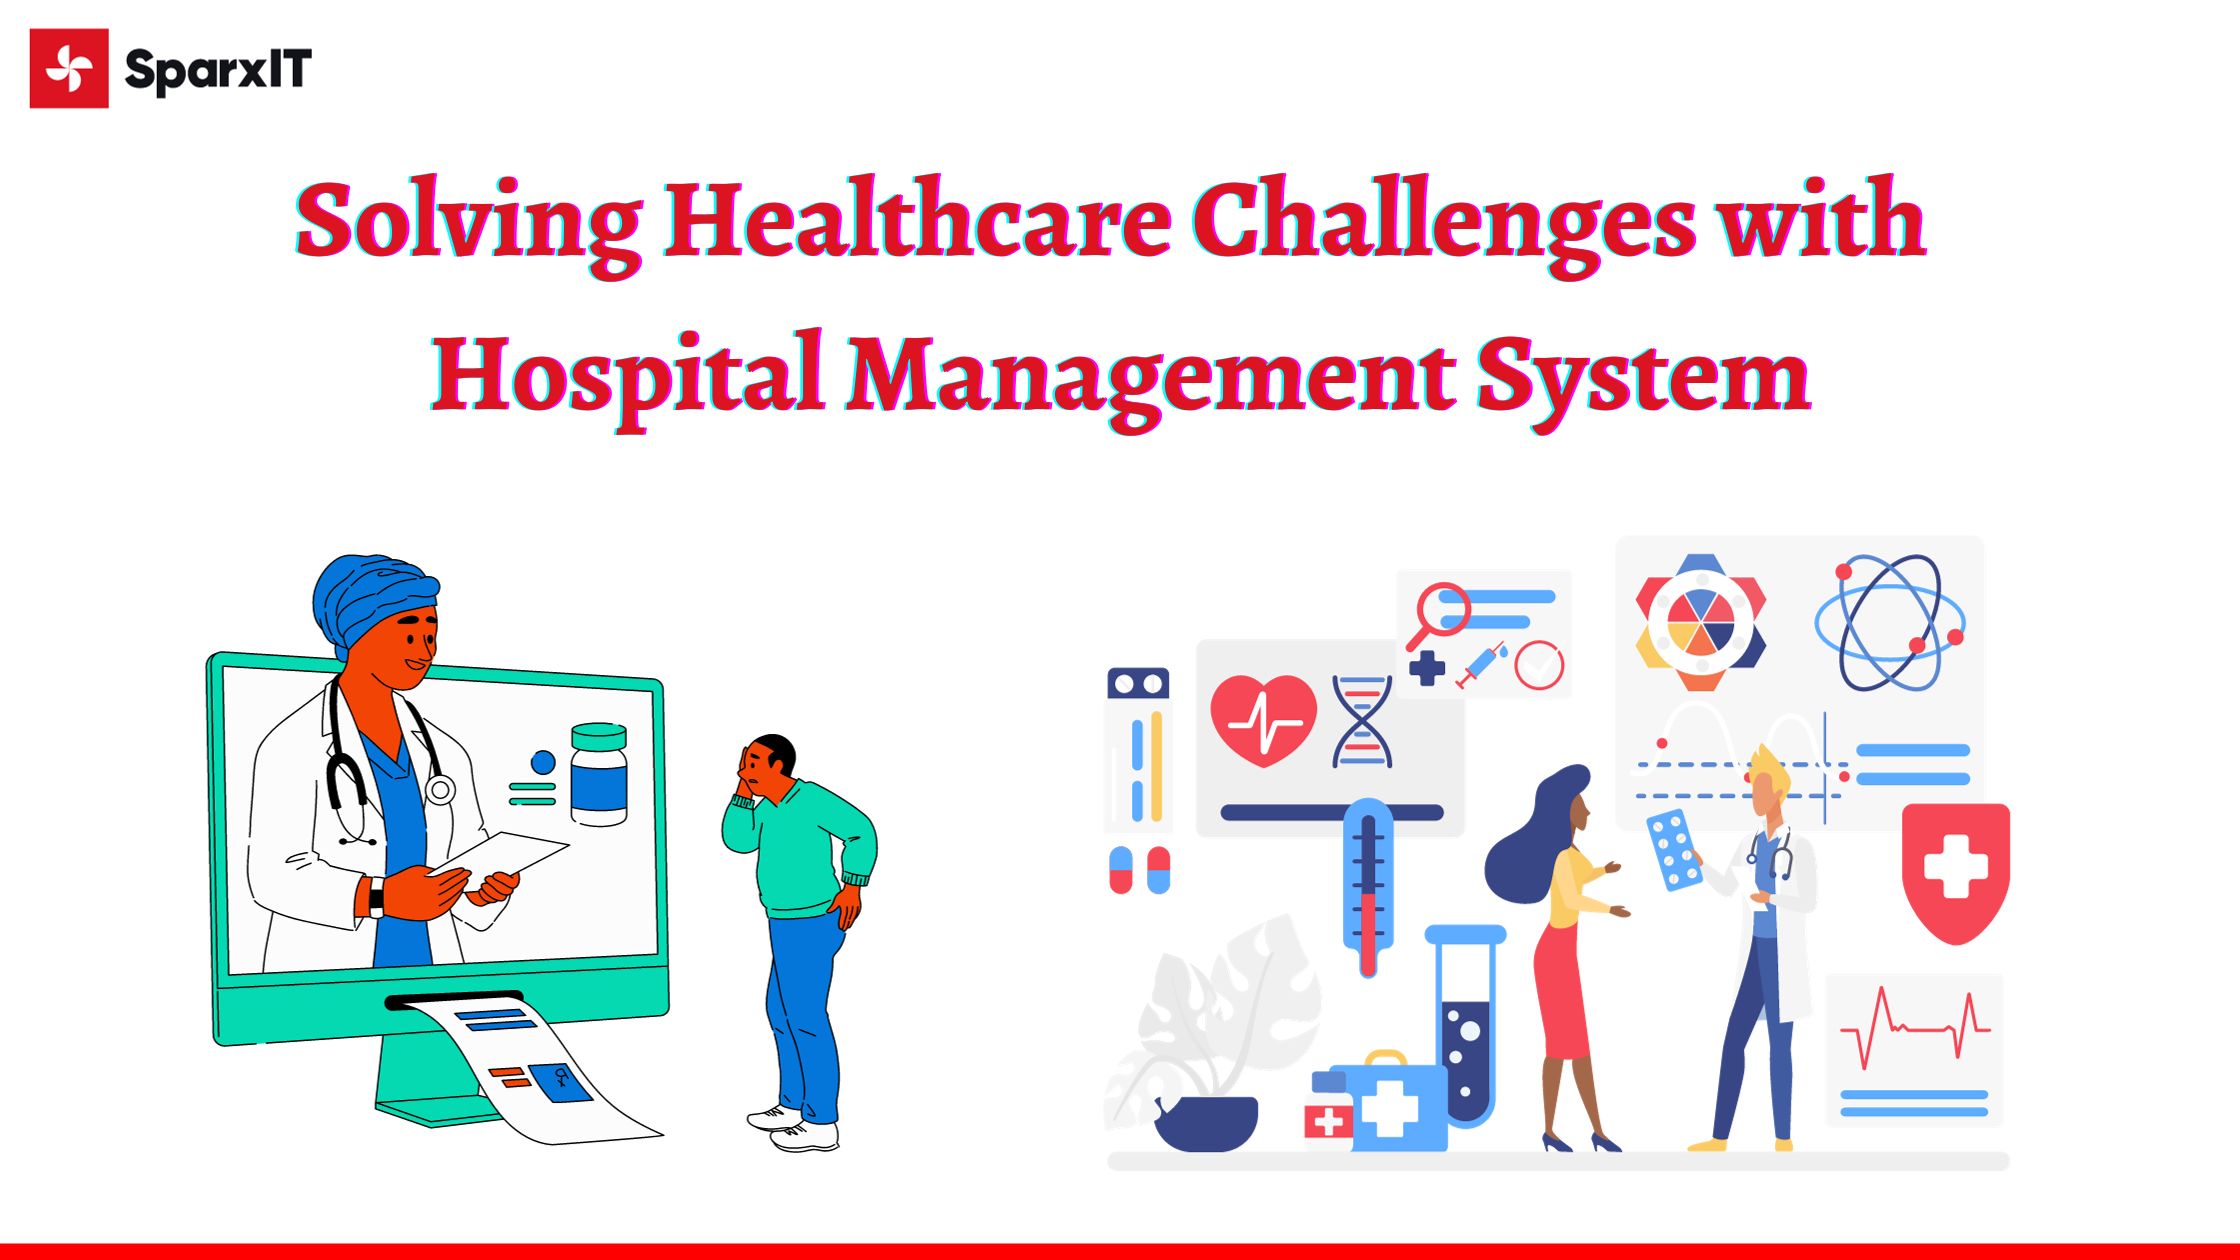 Solving Healthcare Challenges with Hospital Management System